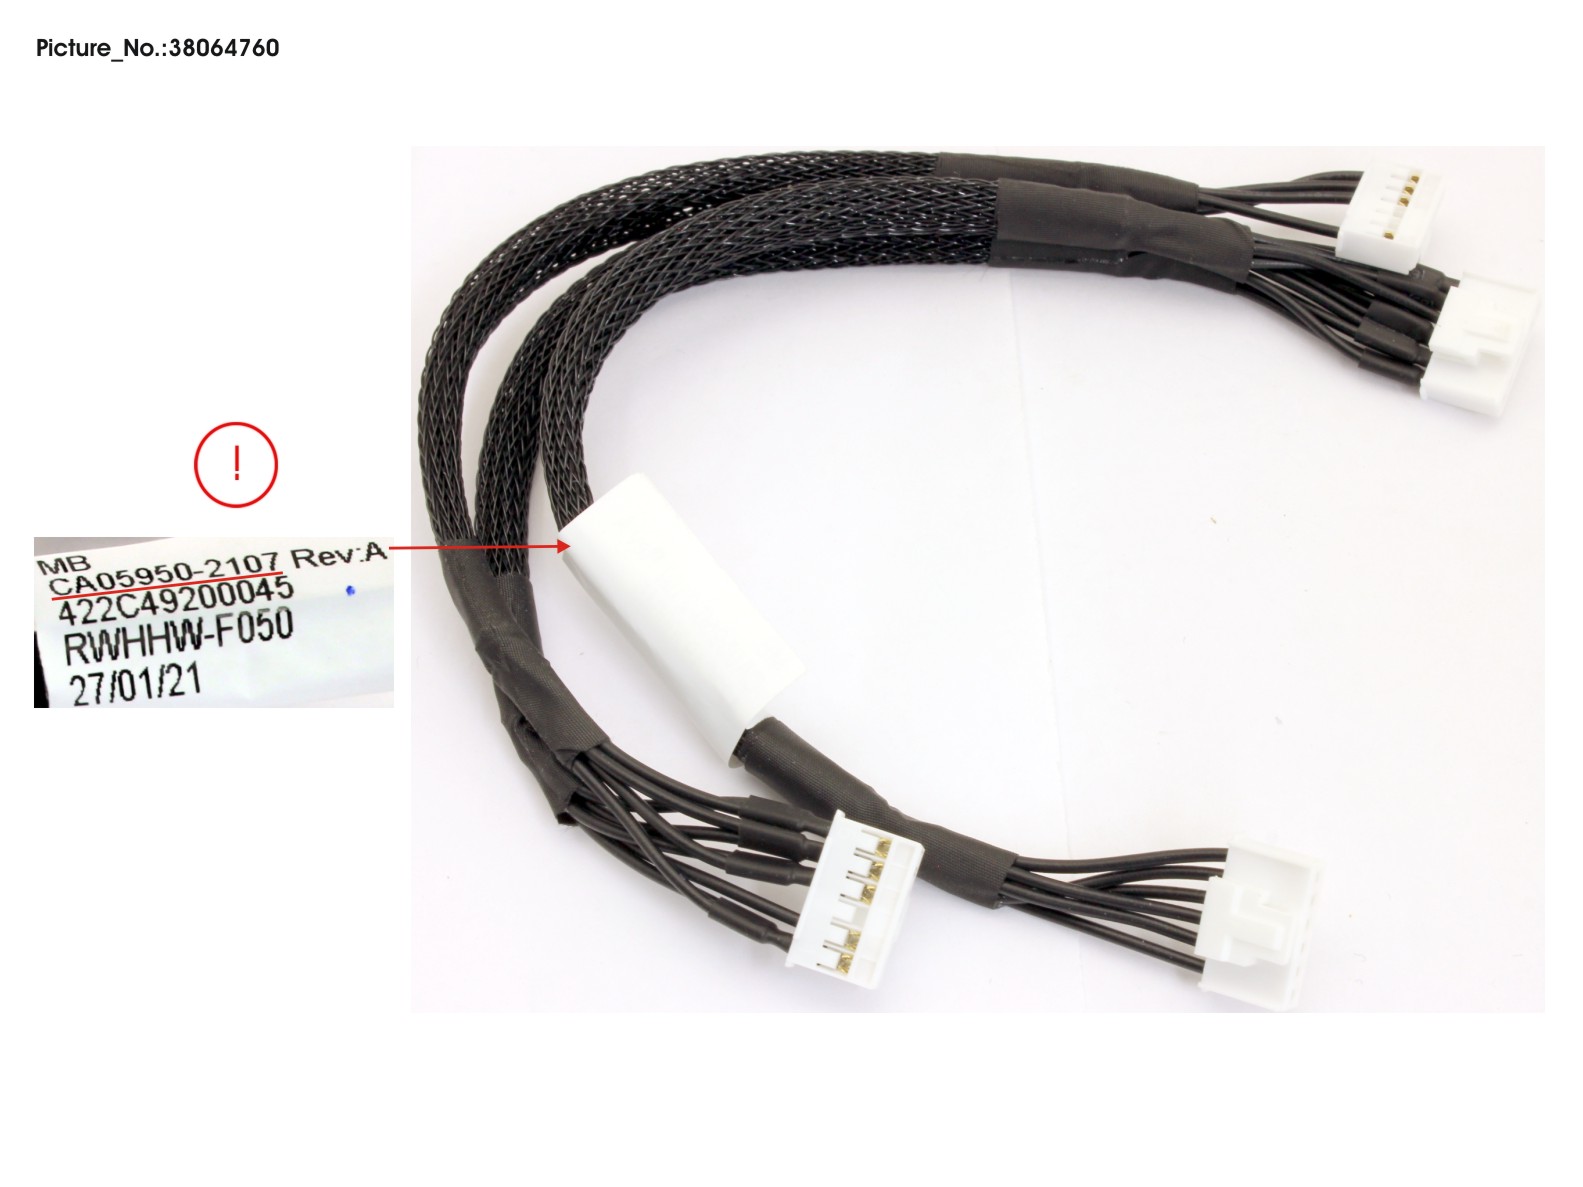 OOB 24X 2.5 MIX BP SIGNAL CABLE(MB TO 24